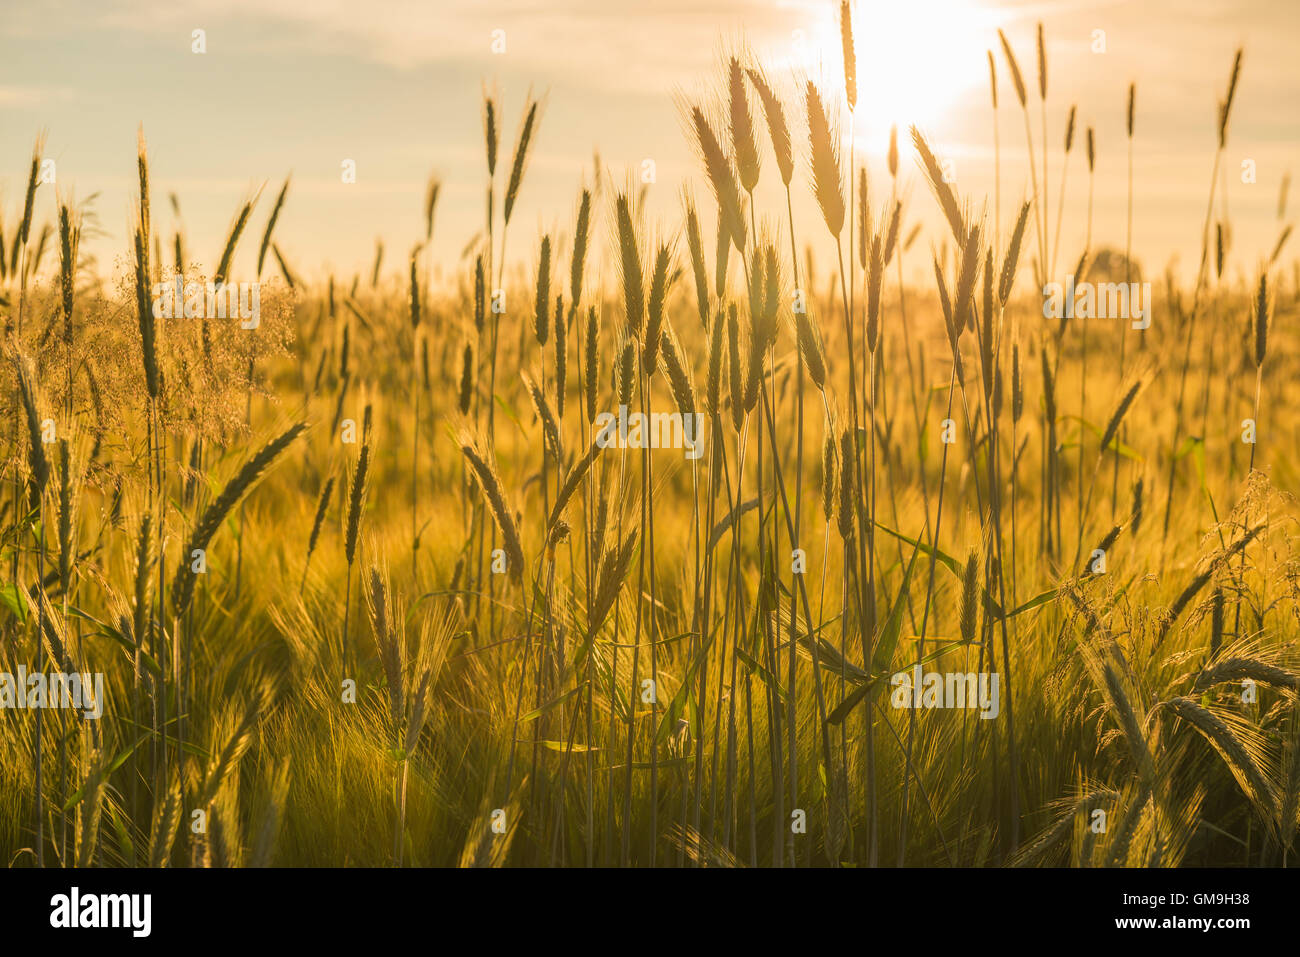 Grain field in the Achterhoek in the Netherlands with a setting sun Stock Photo